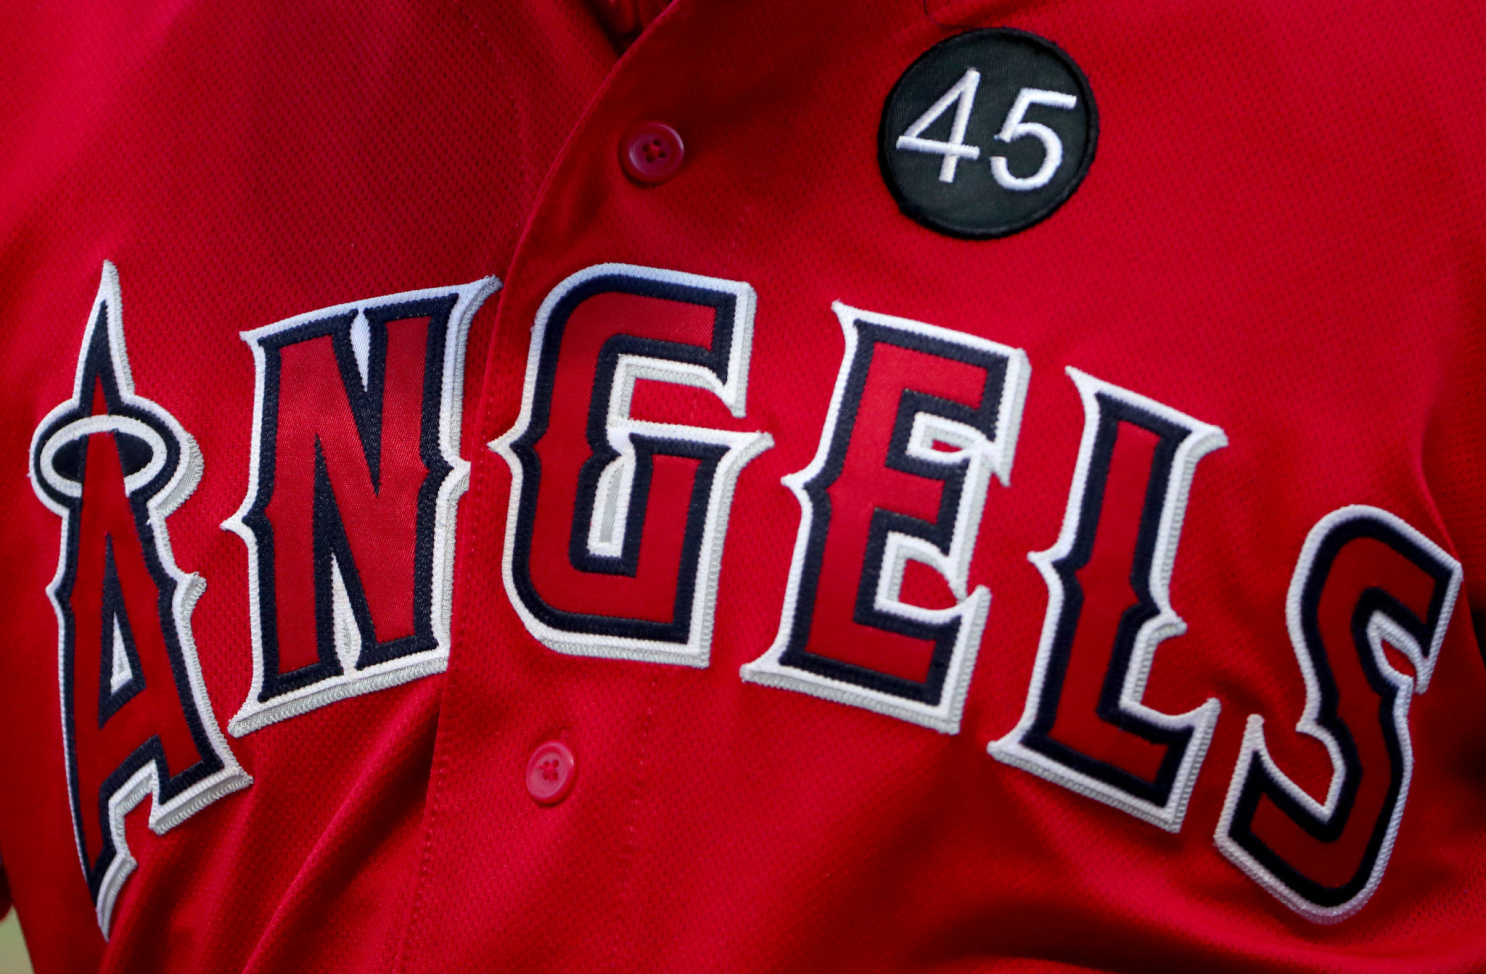 Former Angels employee indicted on possession, distribution of fentanyl in  connection to pitcher Tyler Skaggs' death